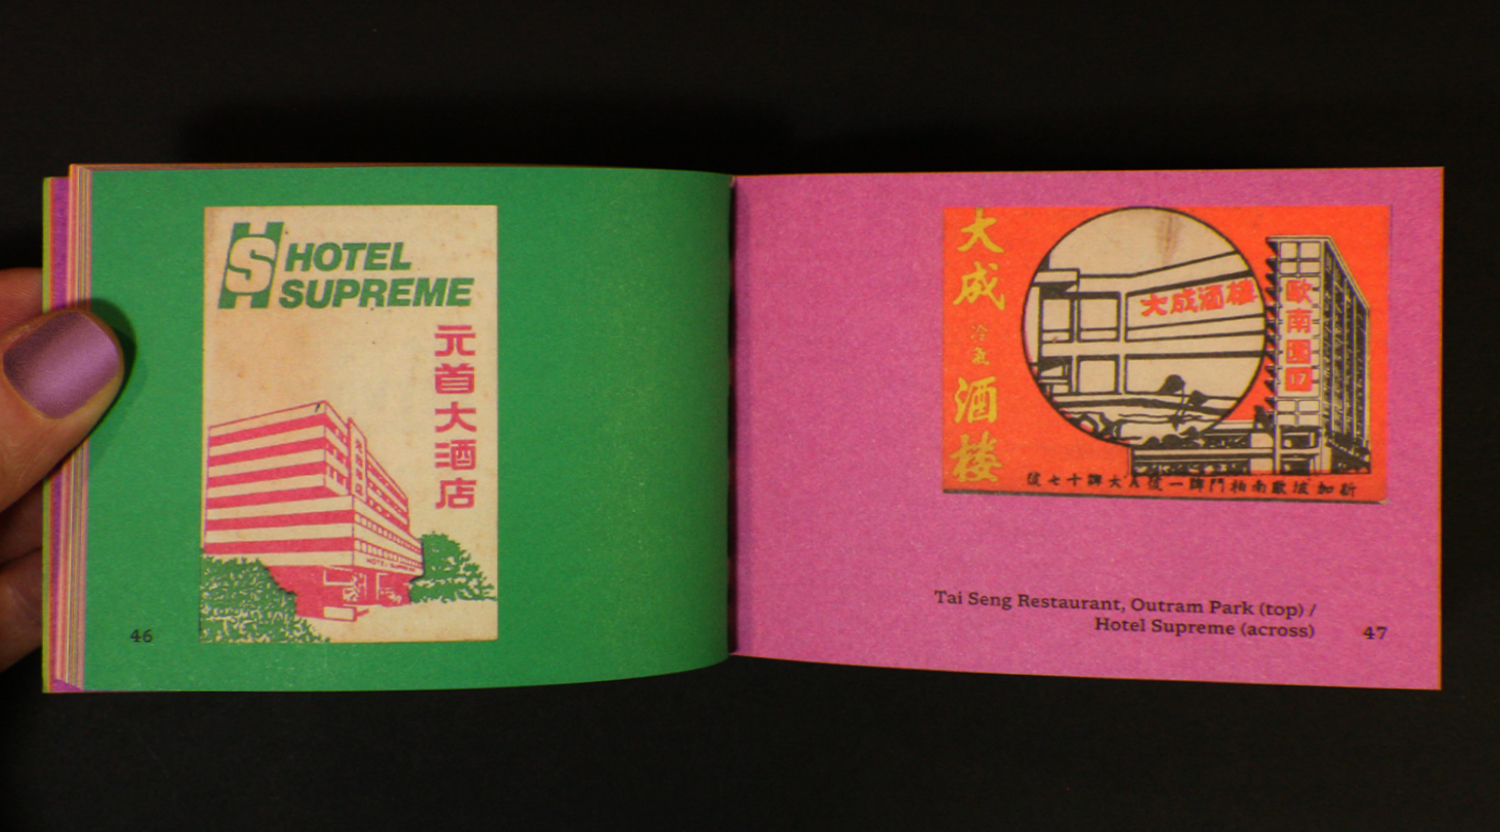 Spread featuring location-led examples of matches, with examples from Hotel Supreme (right) and Tai Seng Restaurant in Outram Park (Left)